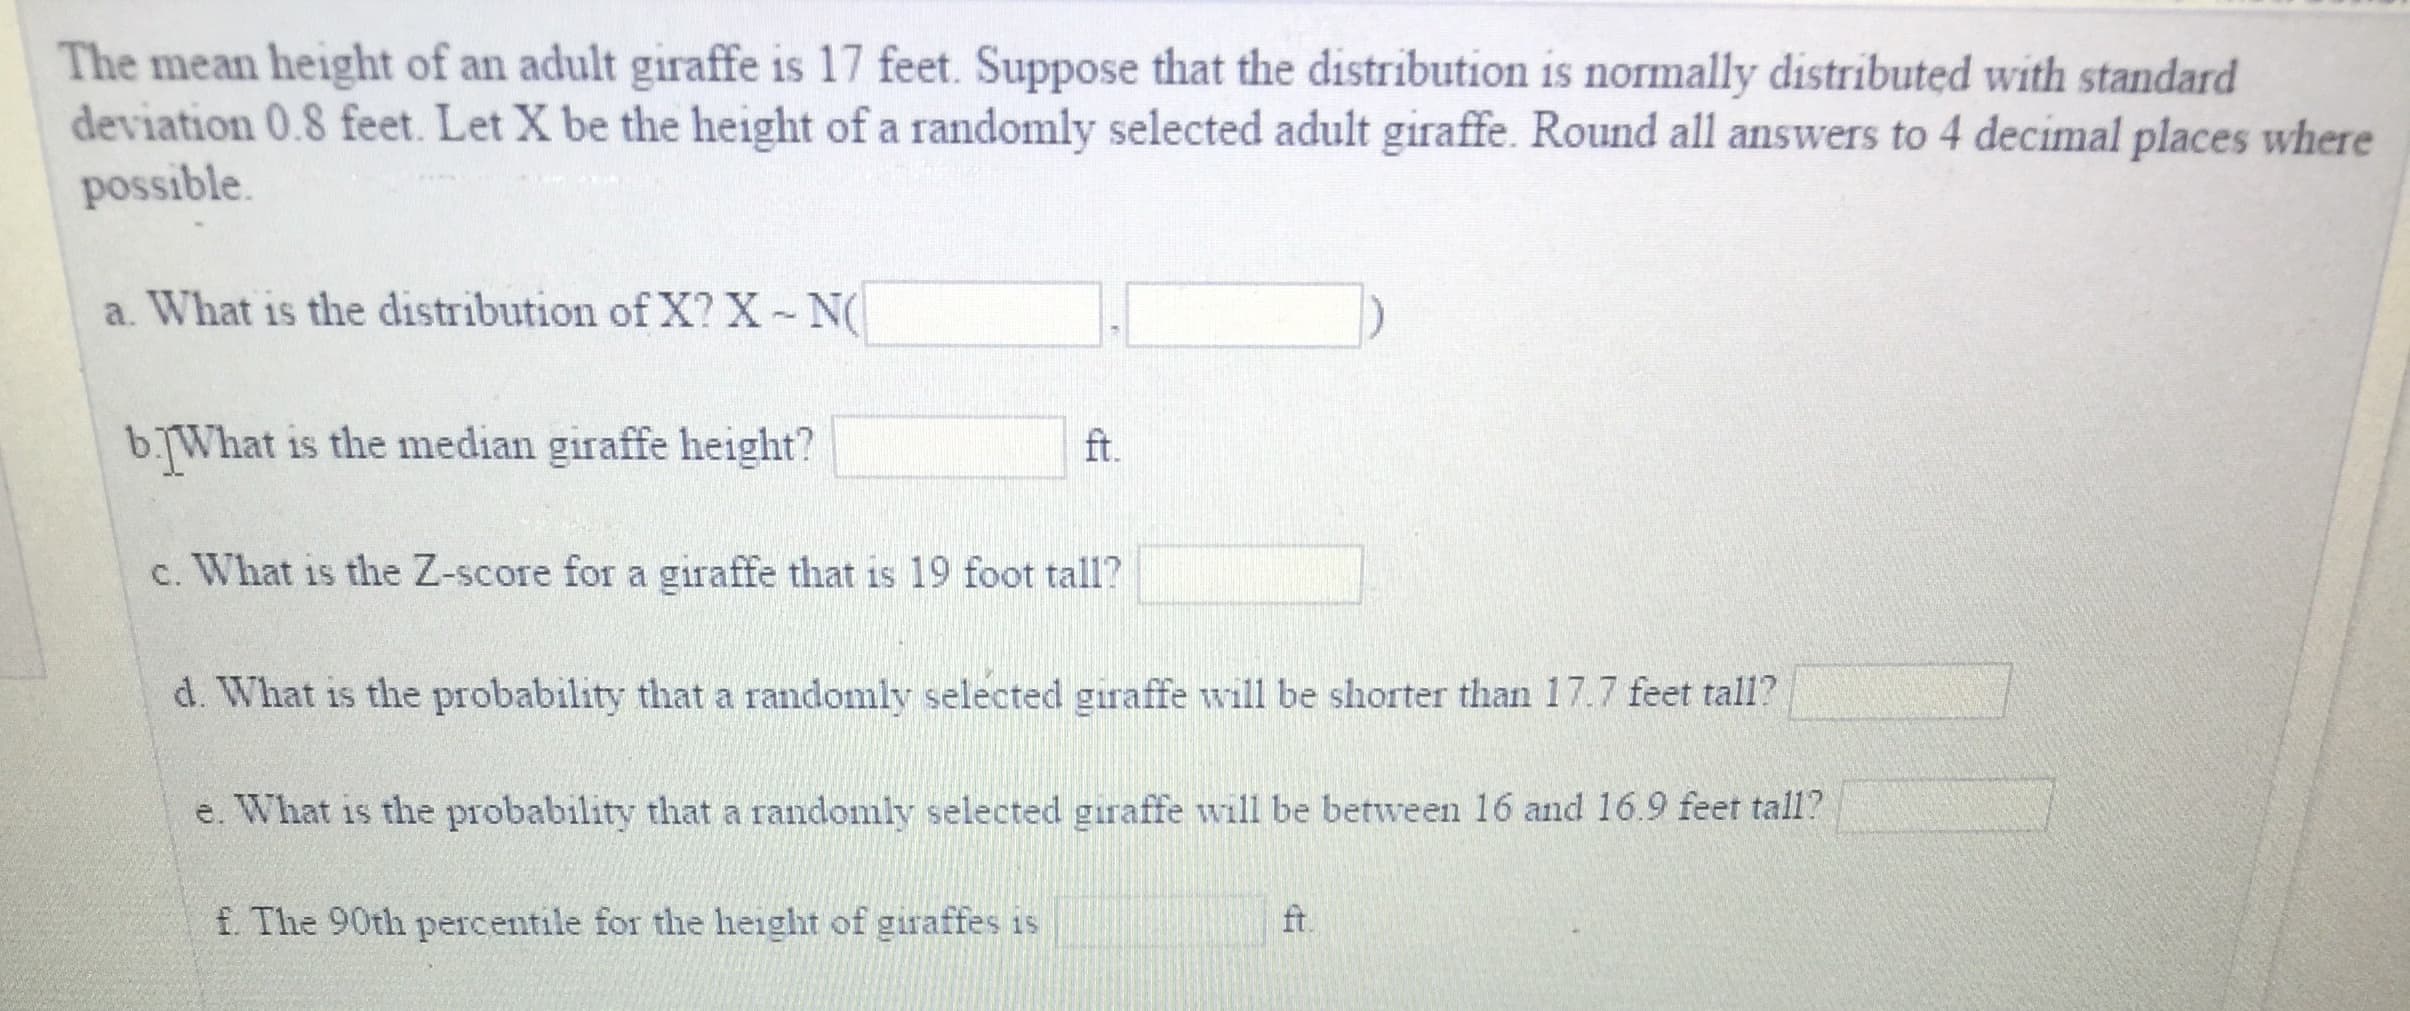 The mean height of an adult giraffe is 17 feet. Suppose that the distribution is normally distributed with standard
deviation 0.8 feet. Let X be the height of a randomly selected adult giraffe. Round all answers to 4 decimal places where
possible
a. What is the distribution of X? X N
b.What is the median giraffe height?
ft.
c. What is the Z-score for a giraffe that is 19 foot tall?
d. What is the probability that a randomly selected giraffe will be shorter than 17.7 feet tall?
e. What is the probability that a randomly selected giraffe will be between 16 and 16.9 feet tall?
f. The 90th percentile for the height of giraffes is
ft.
